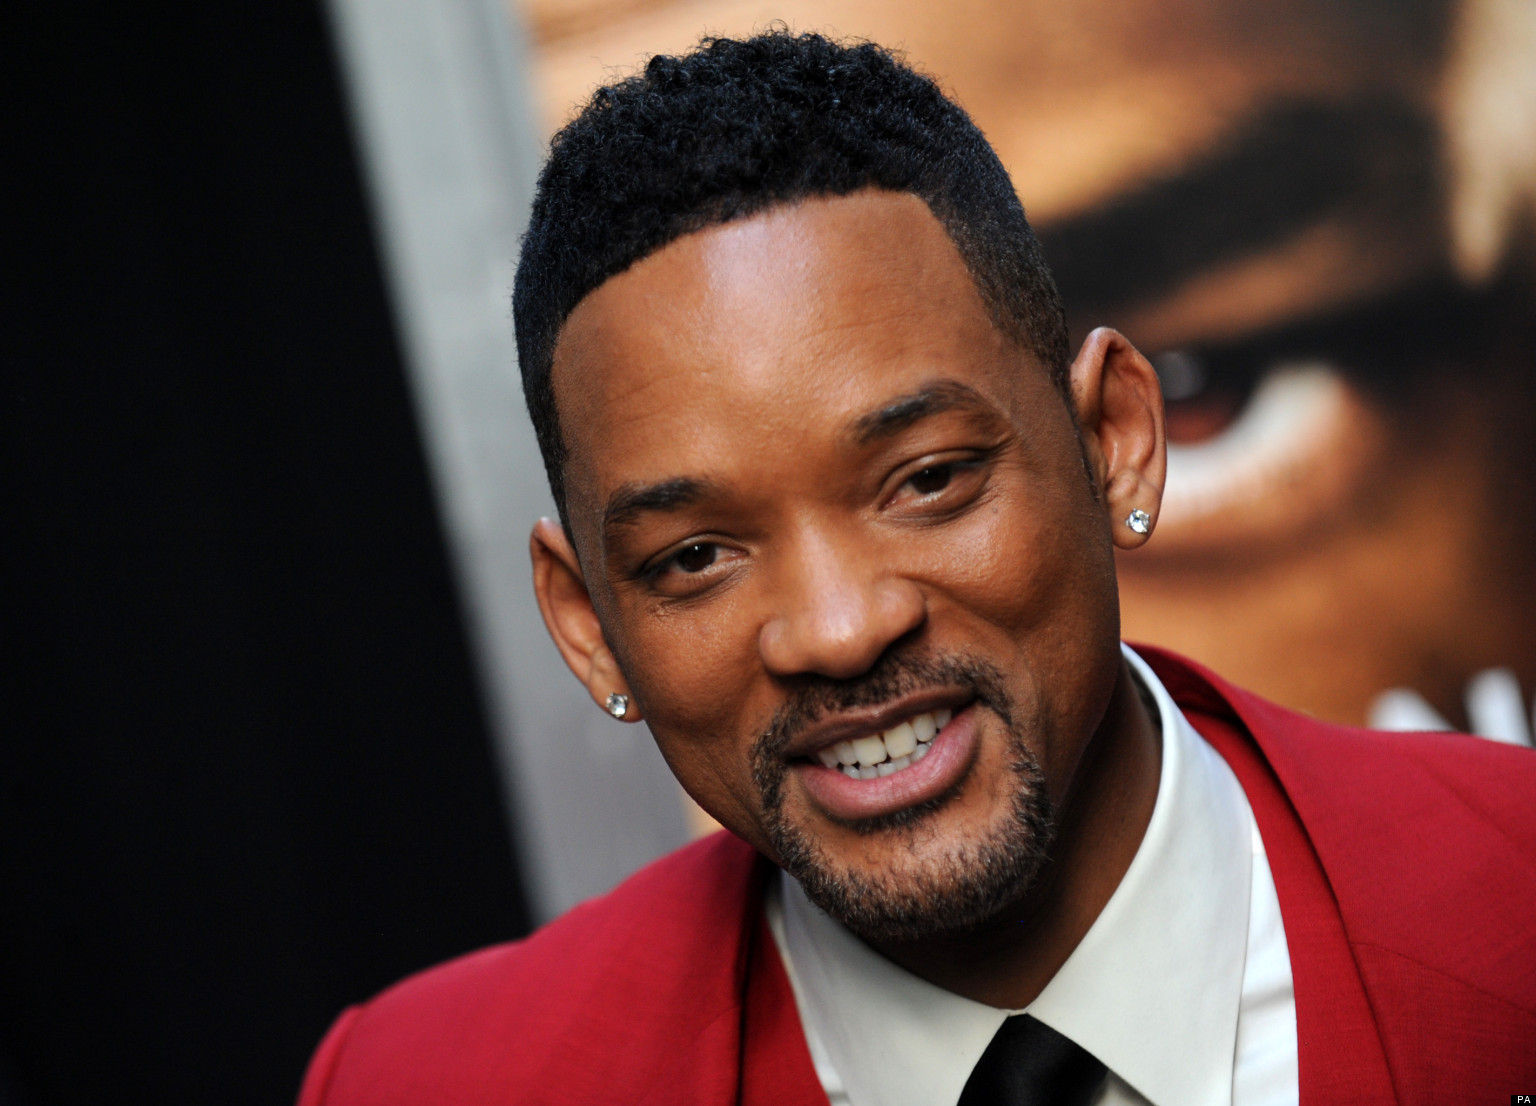 Will Smith attends the 'After Earth' premiere at the Ziegfeld Theater in New York on May 29, 2013.